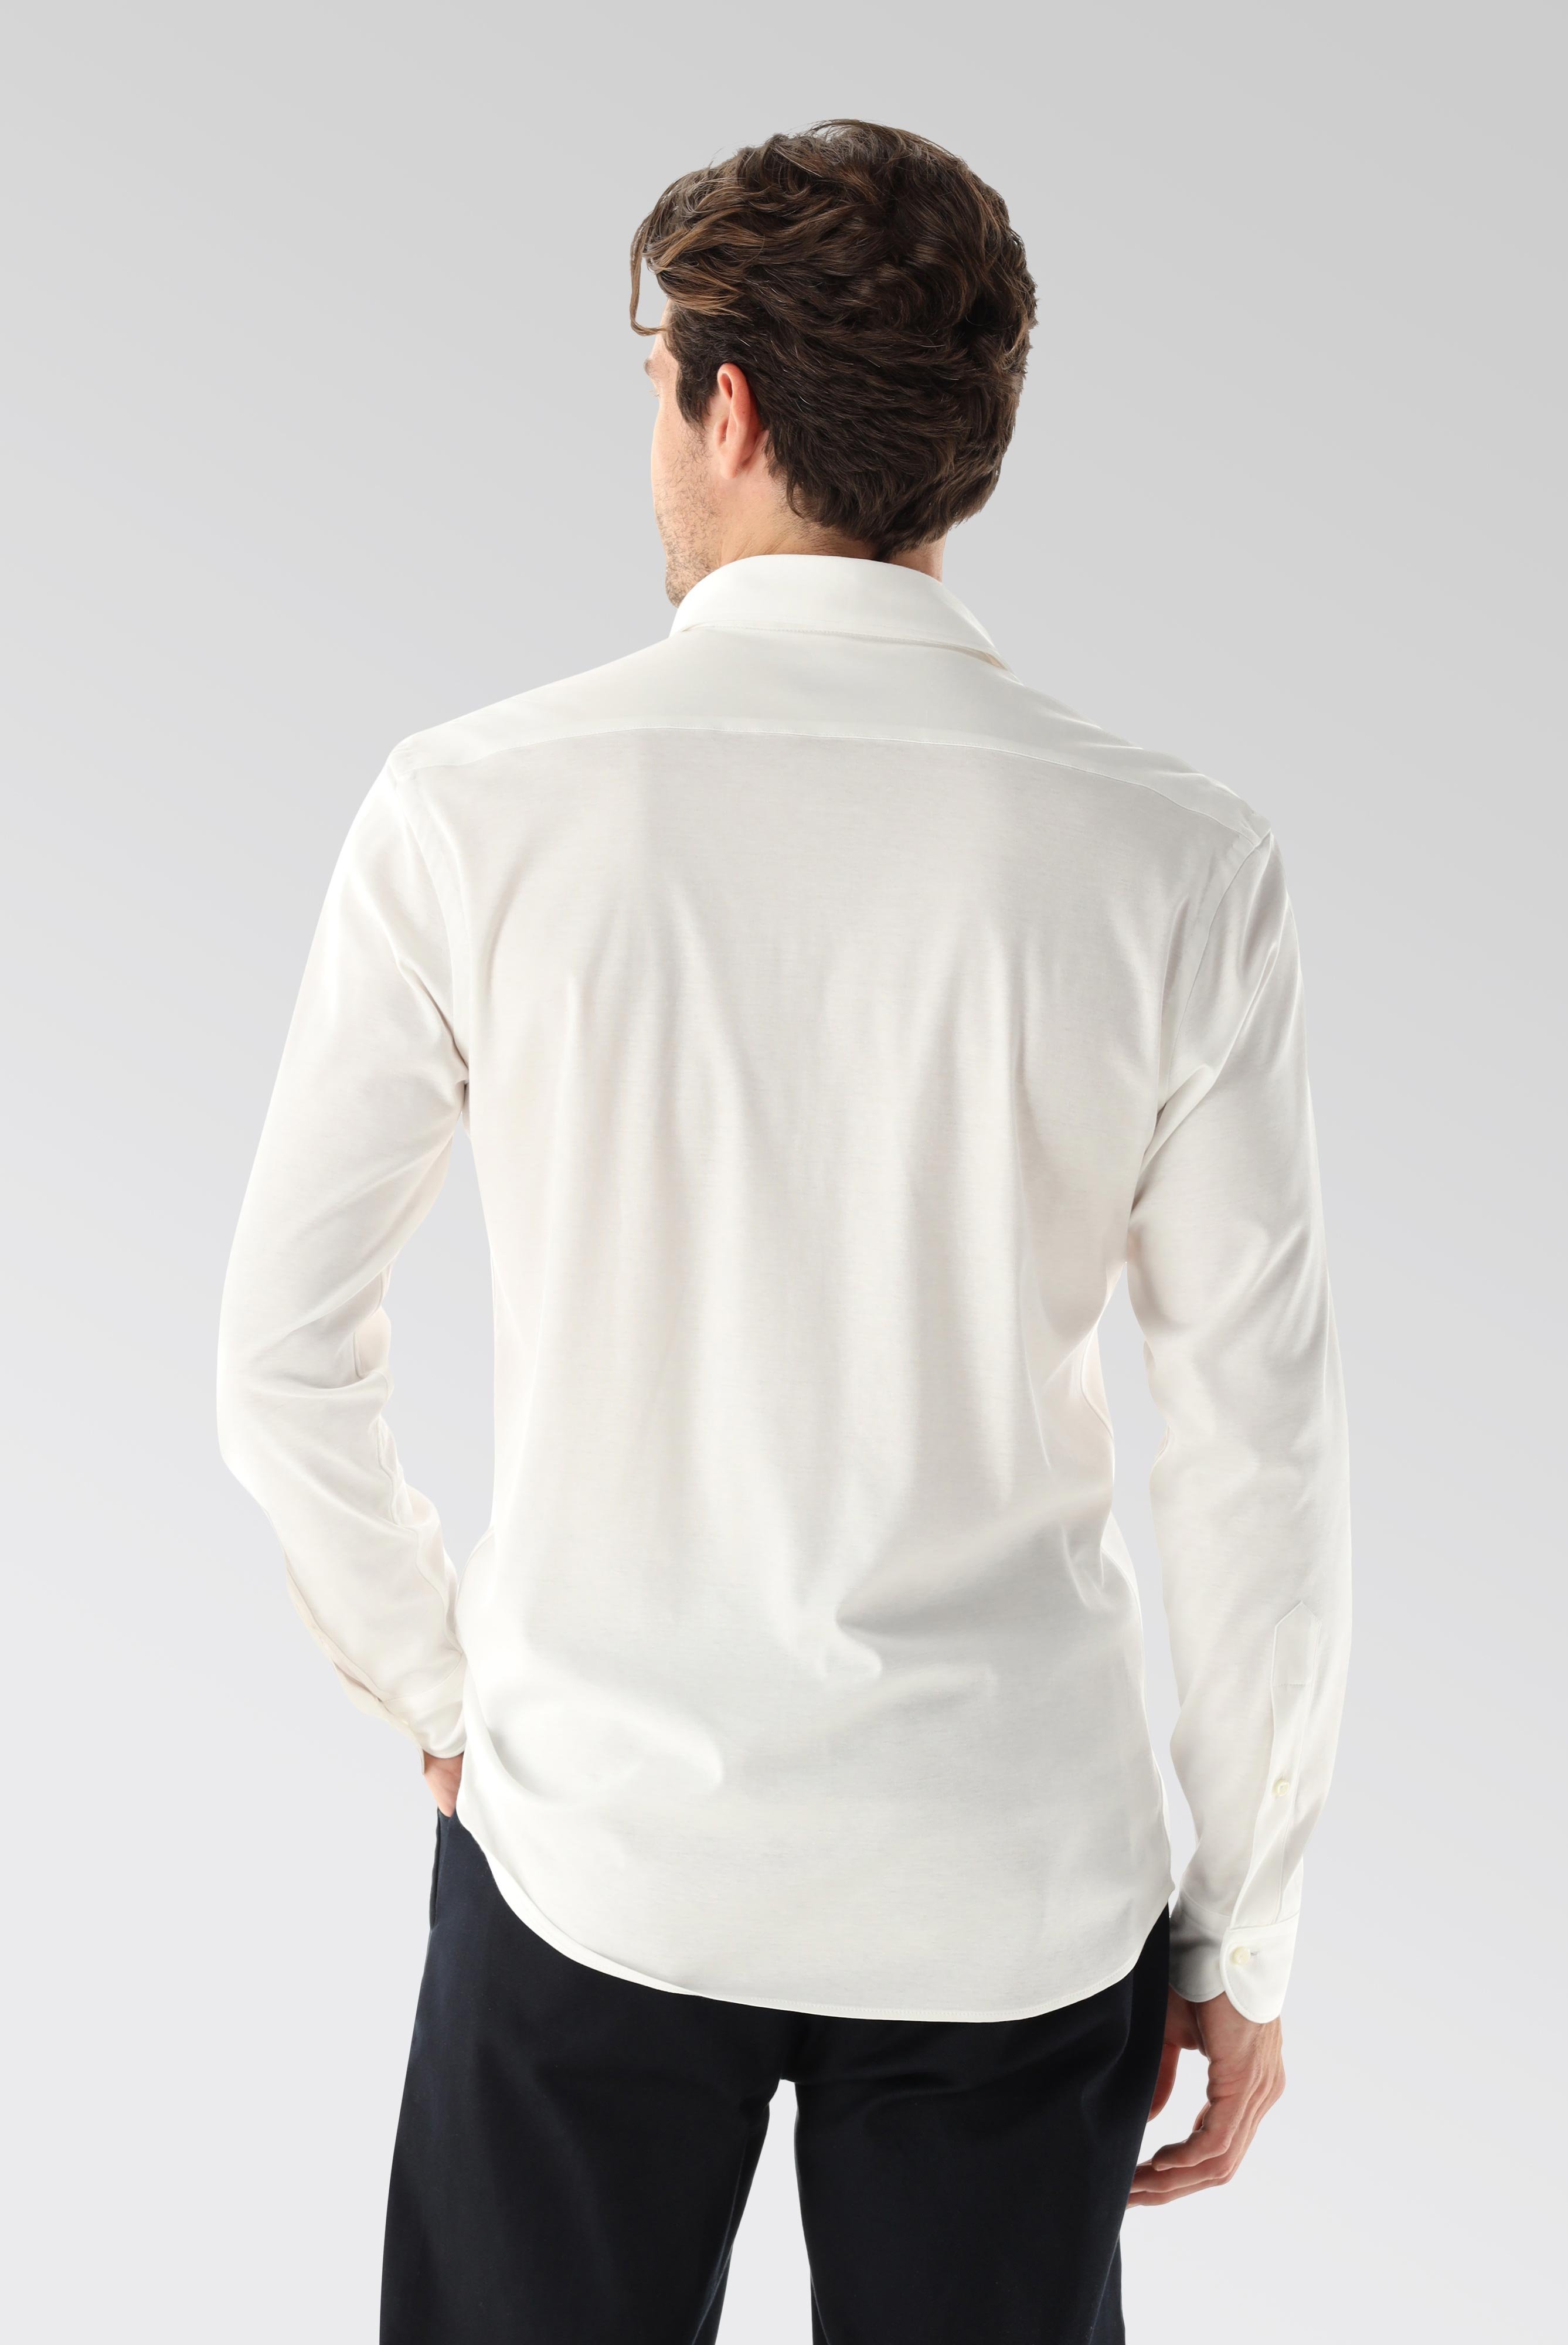 Easy Iron Shirts+Swiss Cotton Jersey Shirt Tailor Fit+20.1683.UC.180031.000.X4L